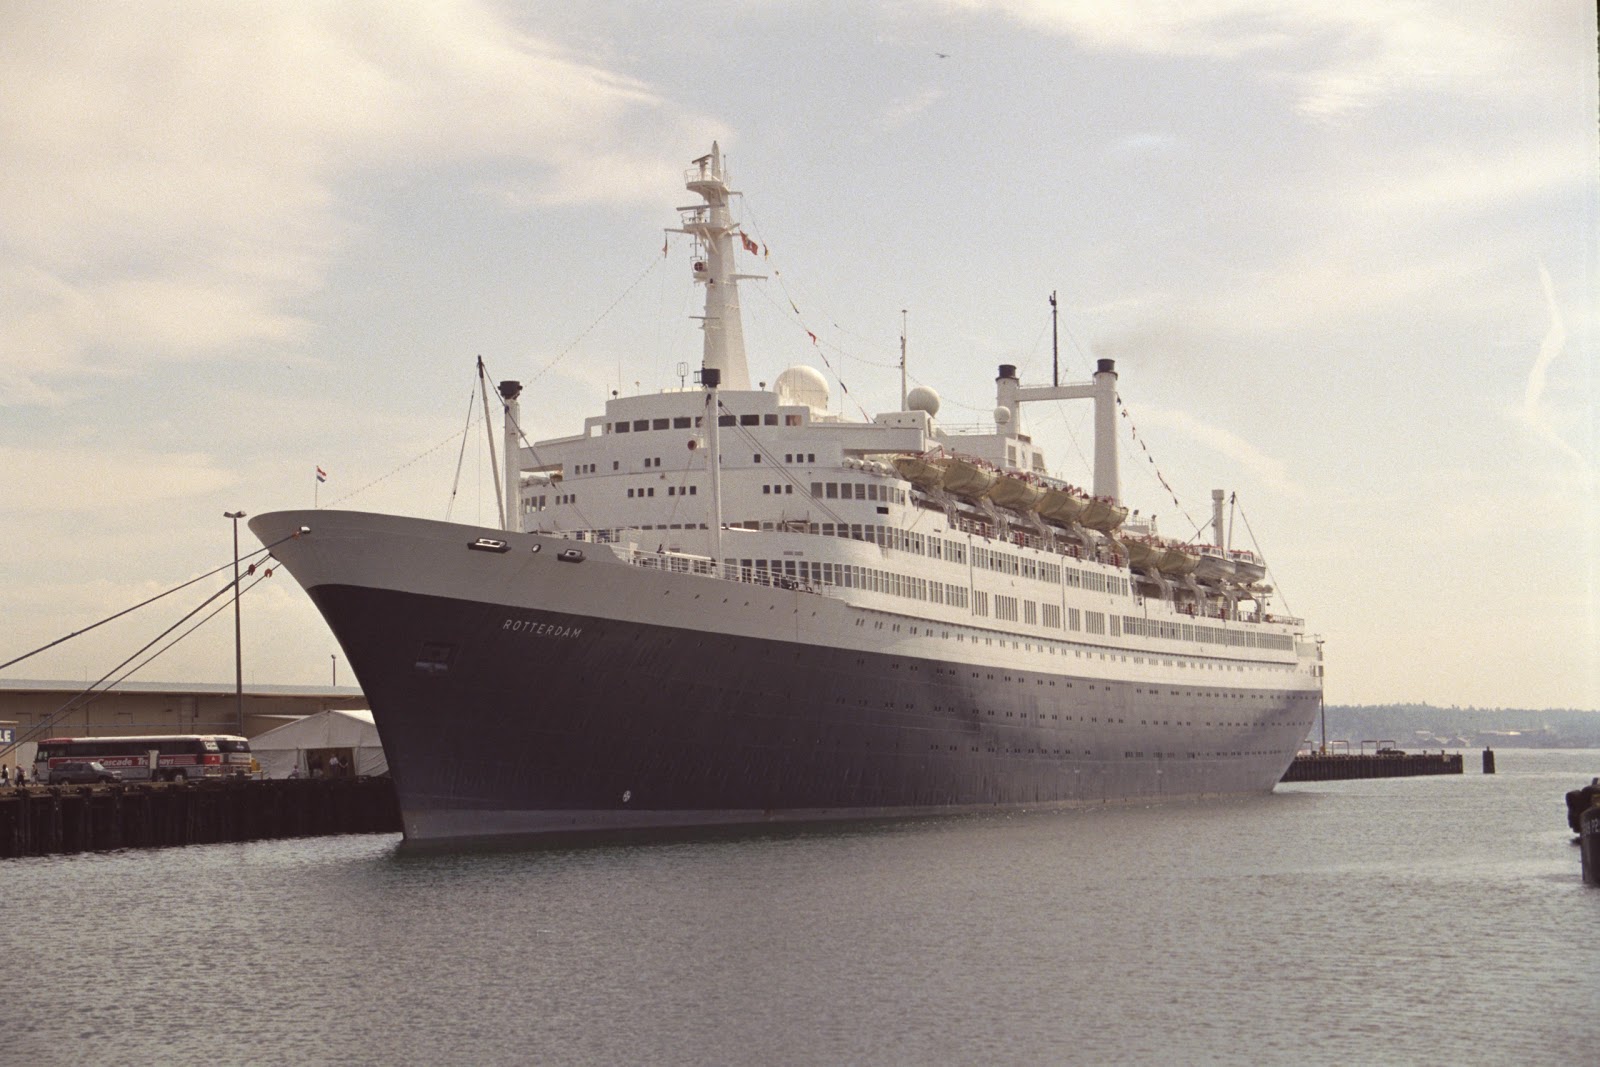 Trains, Planes, Ships and Stories: SS Rotterdam